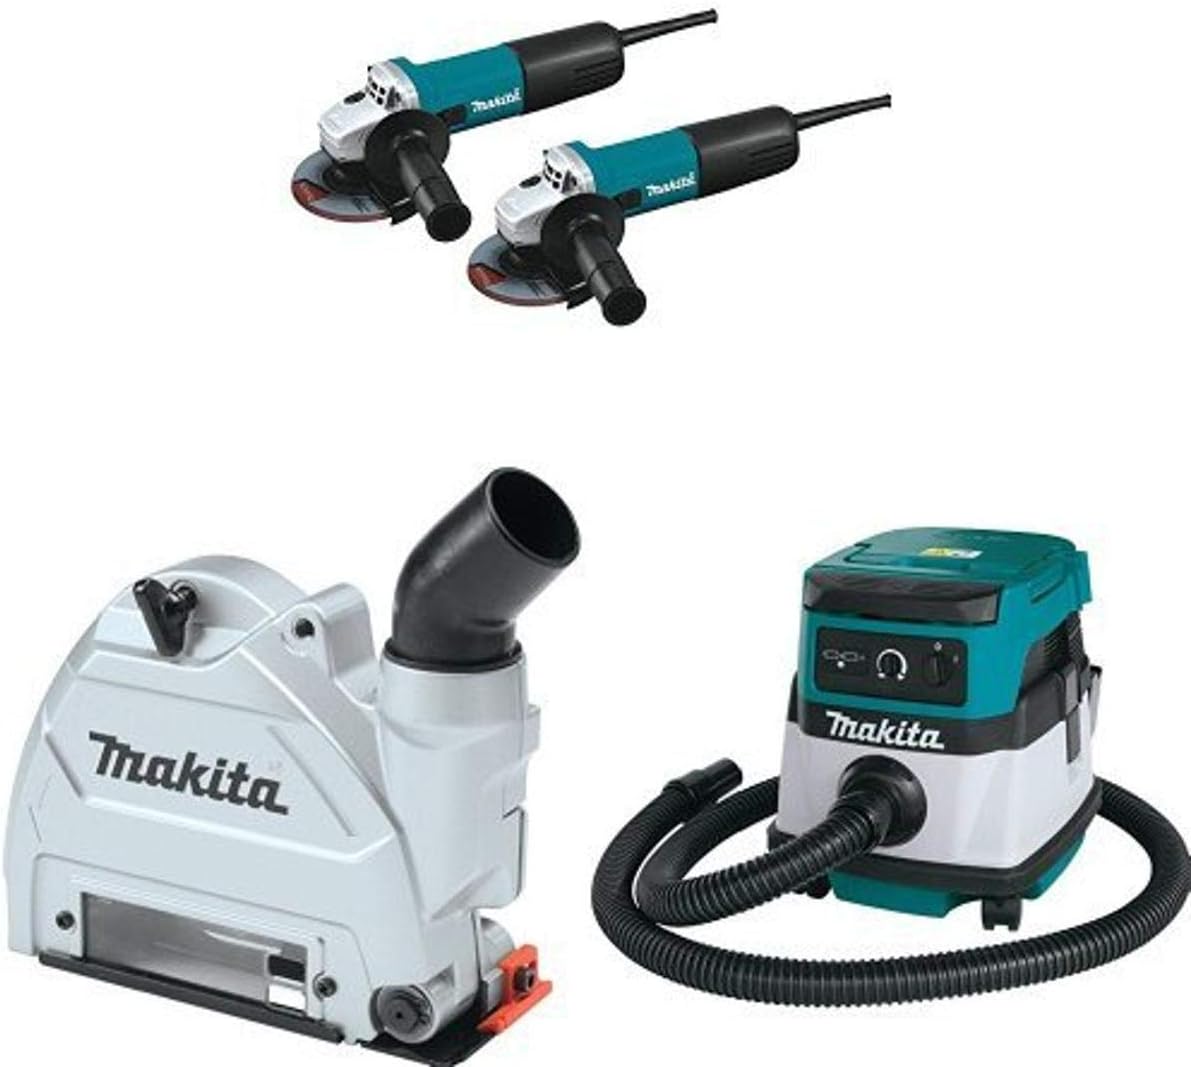 Makita 9557NB2 4-1/2-Inch Angle Grinder (2-Pack), with AC/DC Switch, 196846-1 Dust Extraction Tuck Point Guard,  XCV04Z 18V X2 LXT (36V) 2.1 Gallon HEPA Filter Dry Dust Extractor/Vacuum